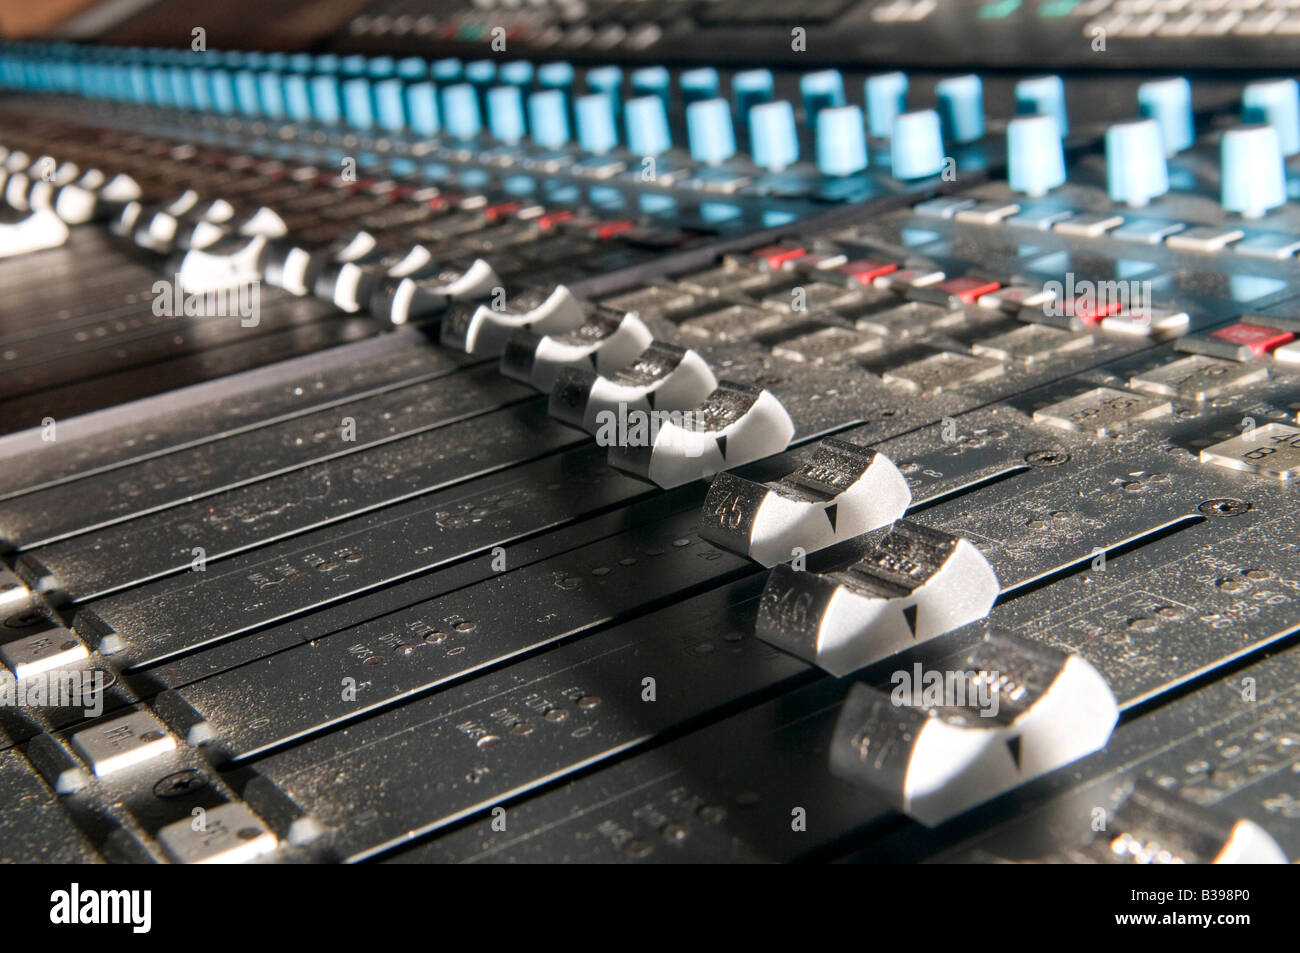 calrec audio mixing console showing the faders Stock Photo